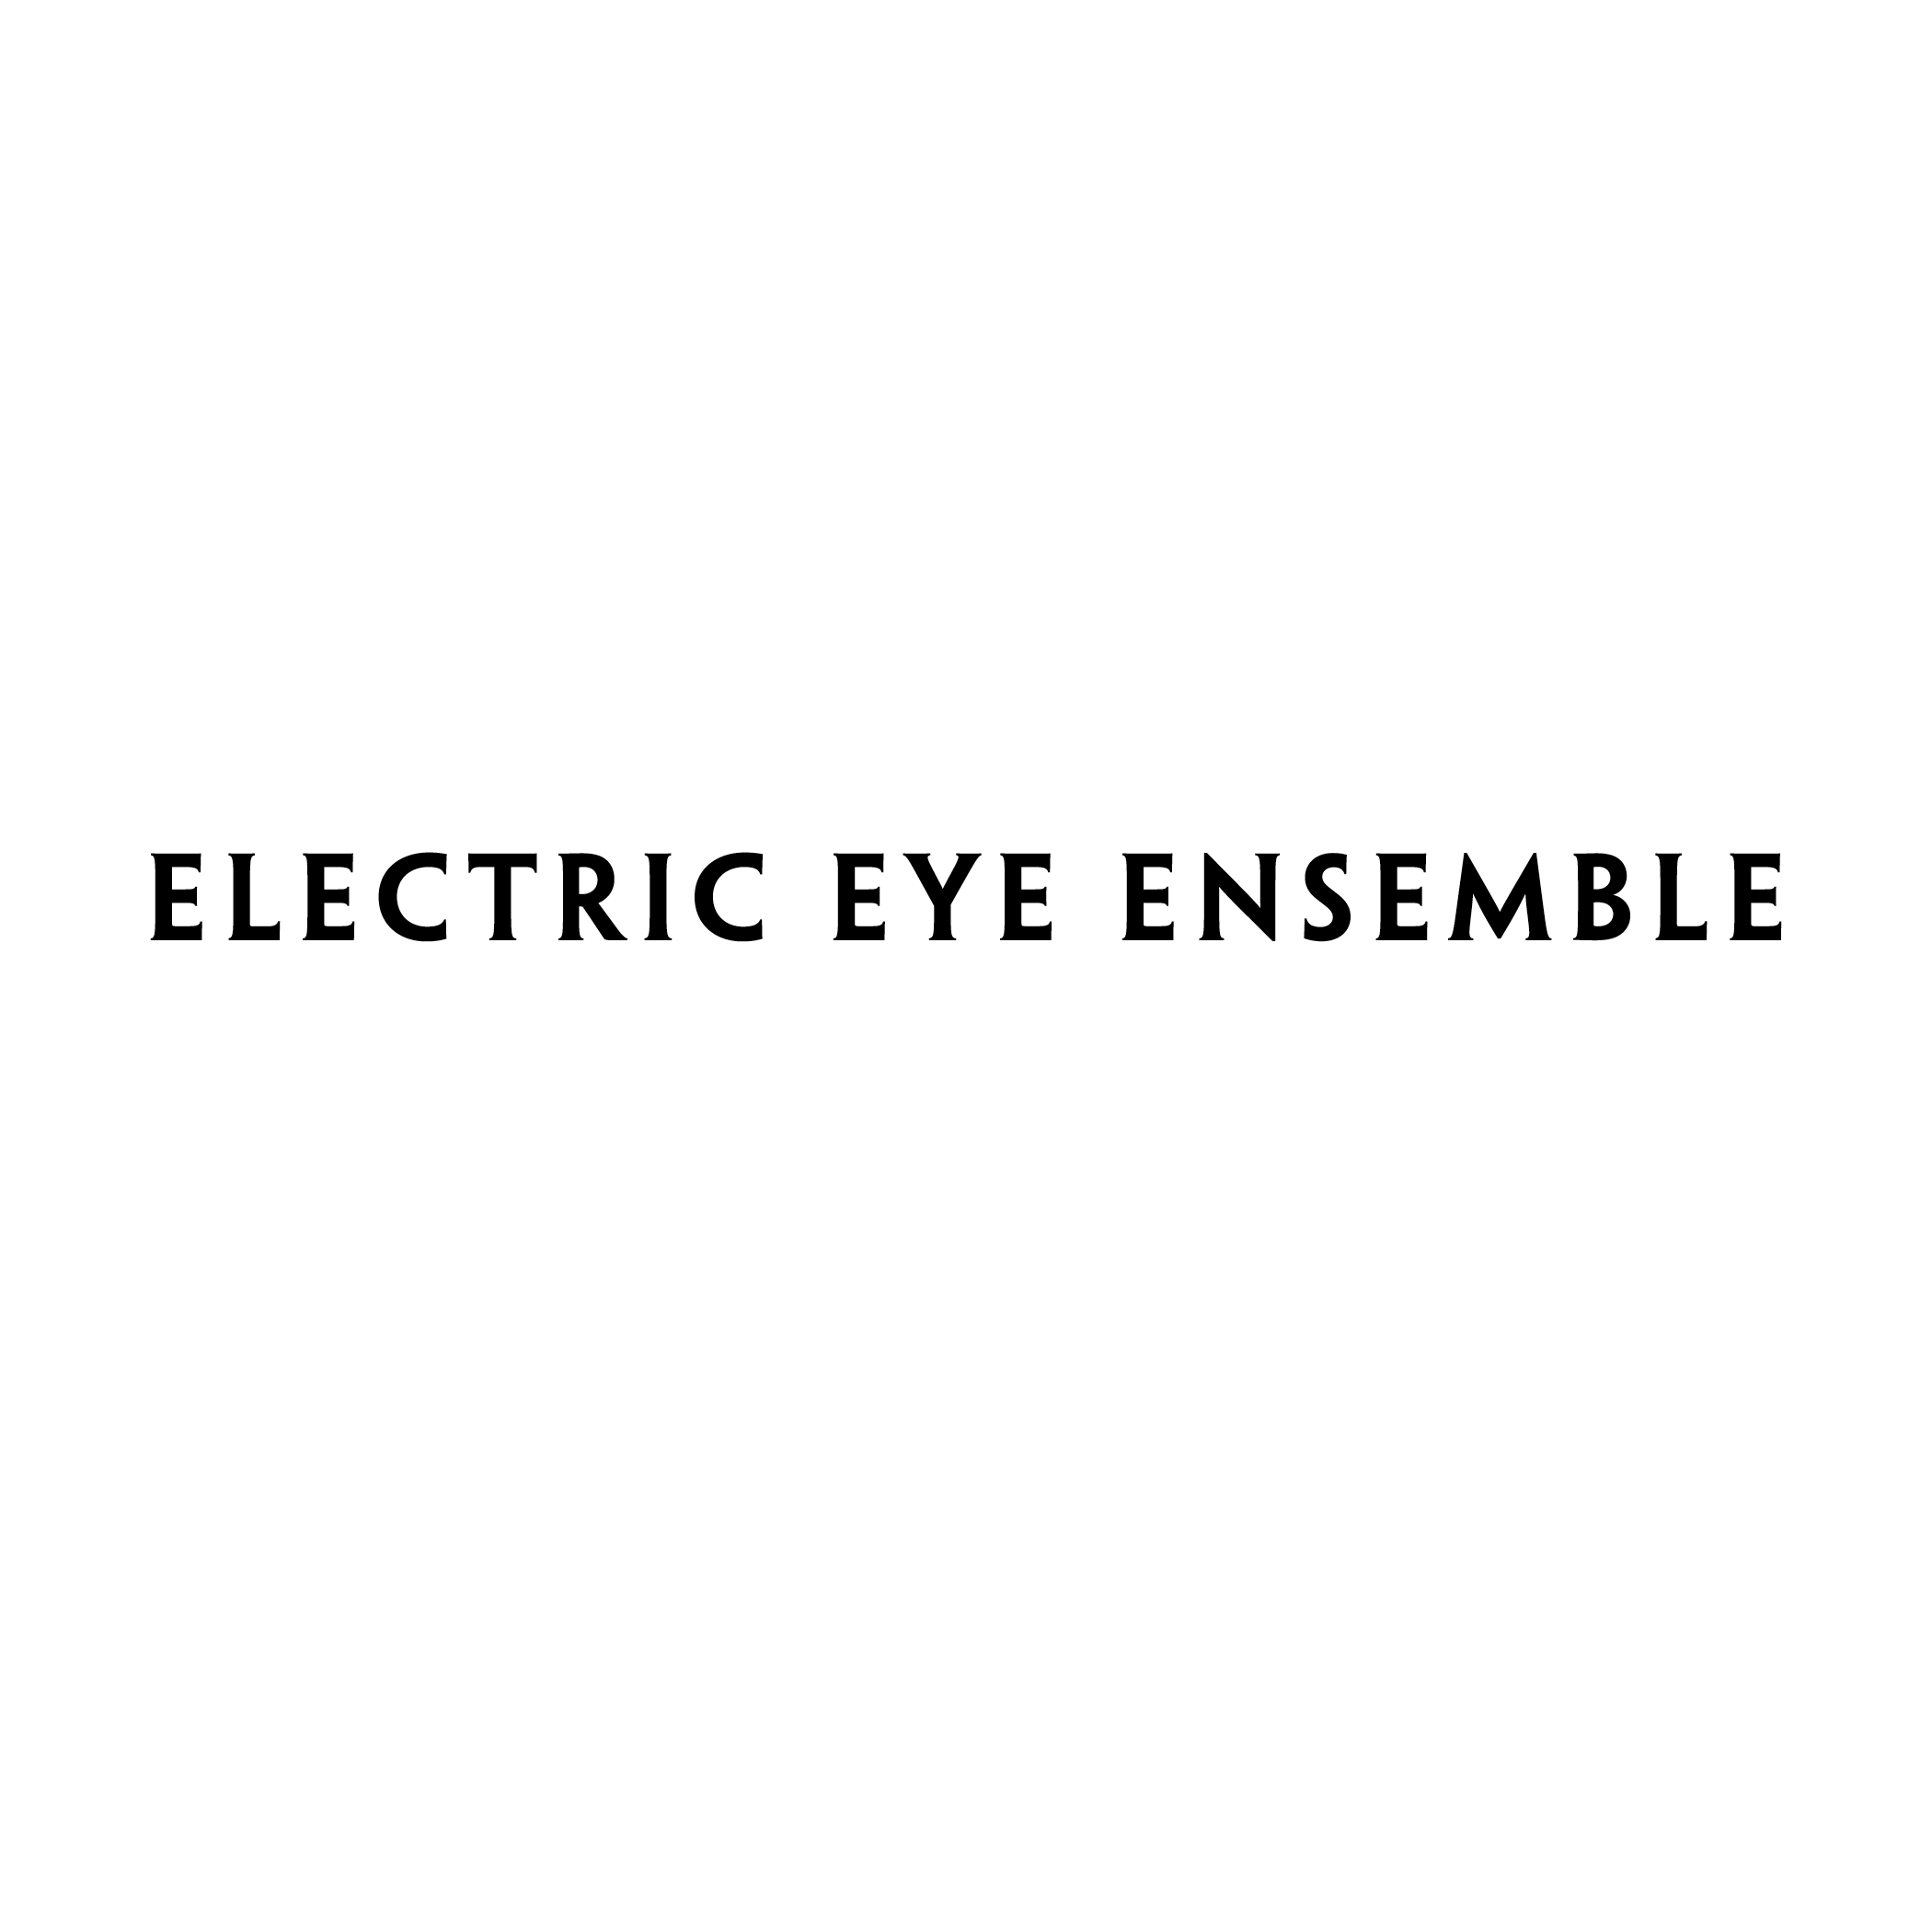 eee_company_identity_10.png